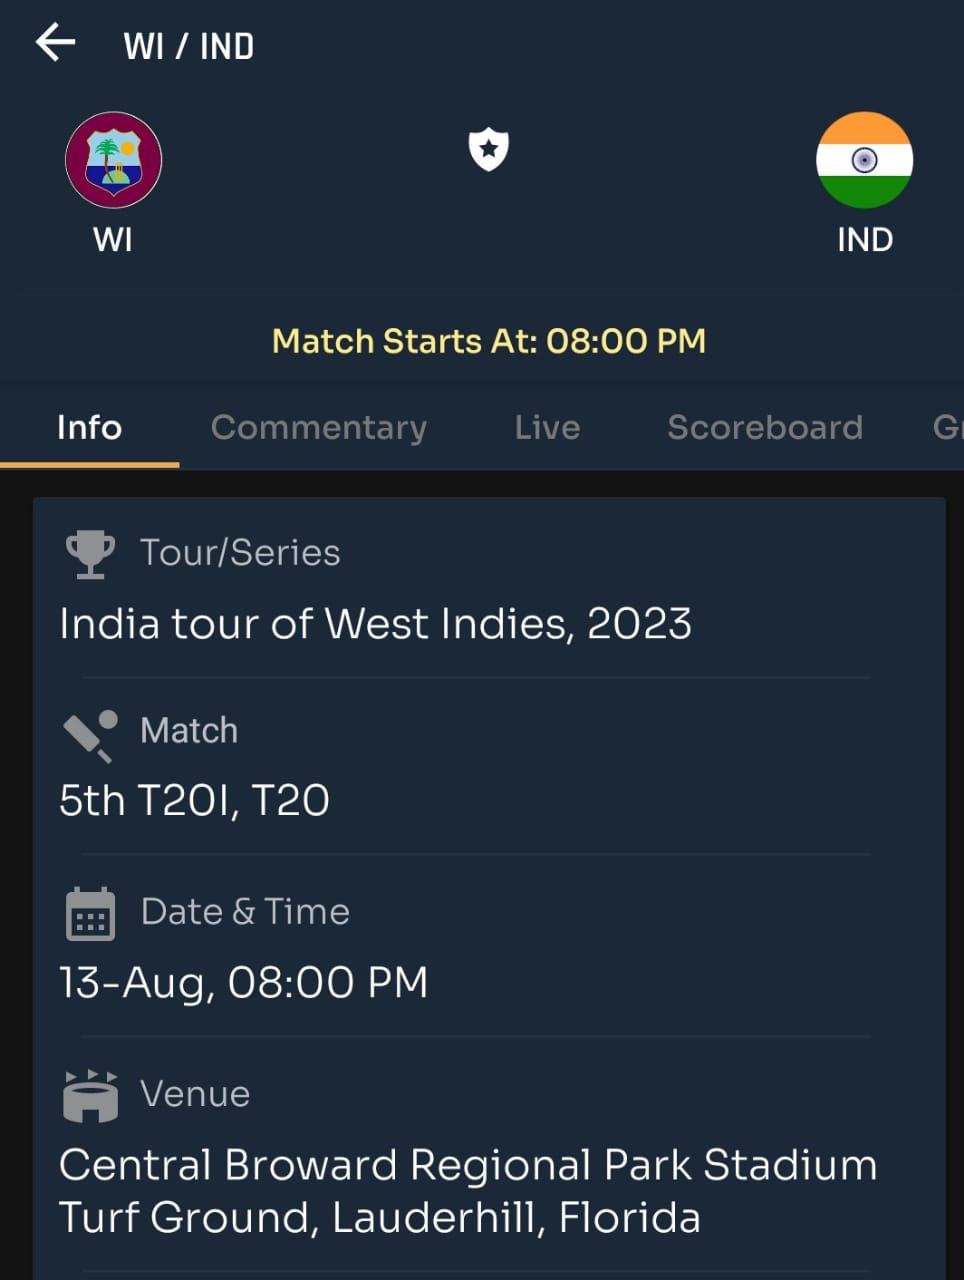 IND vs WI 5th T20 | Today cricket match prediction tips